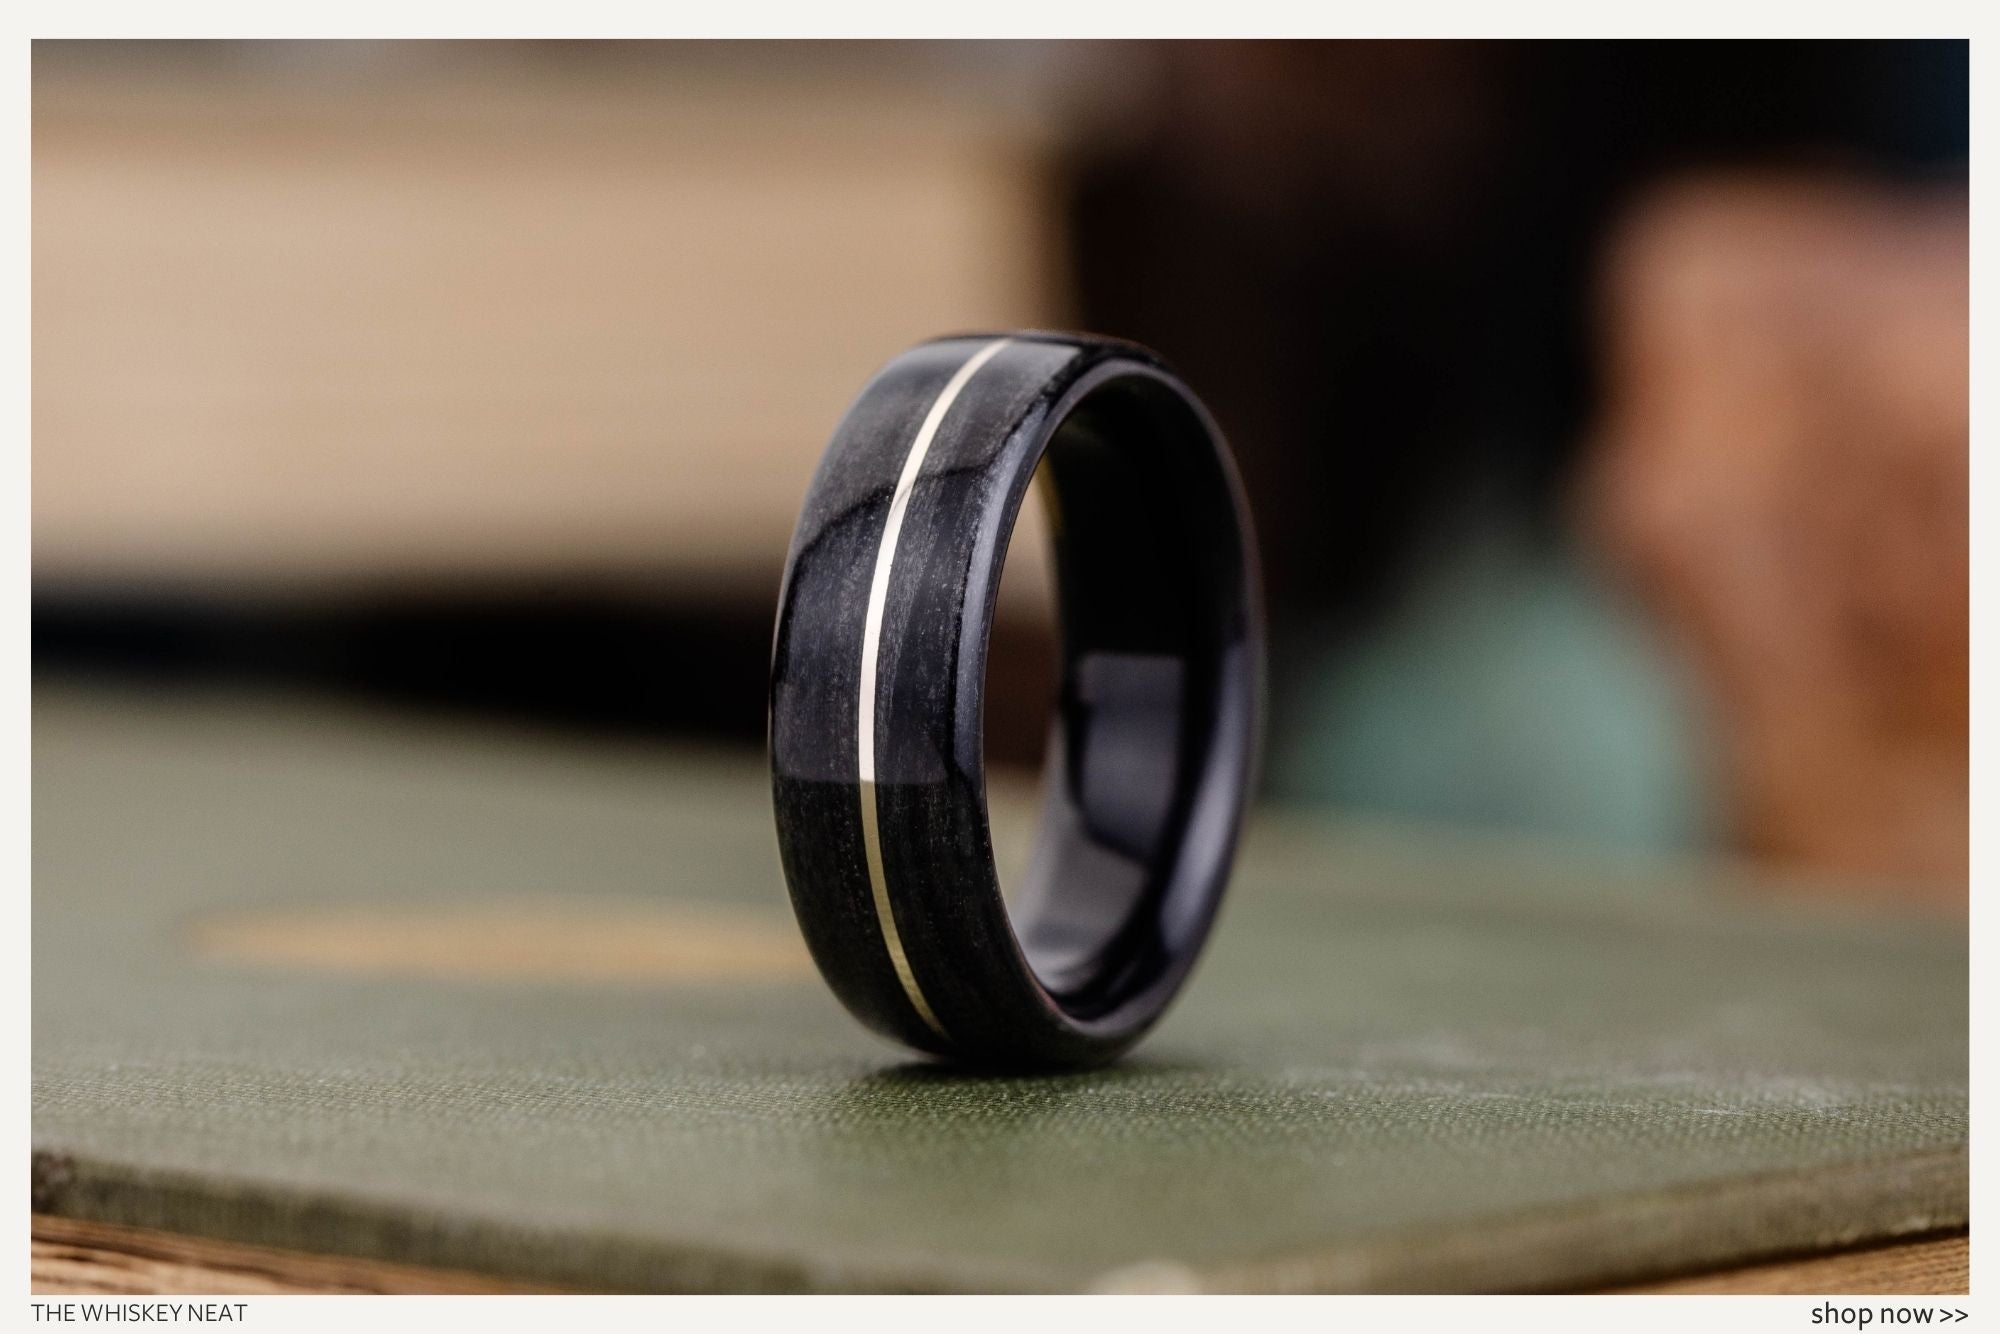 our-favorite-rugged-rustic-wedding-bands-for-him-whiskey-neat-wooden-ring-black-whiskey-barrel-wedding-band-rustic-and-main